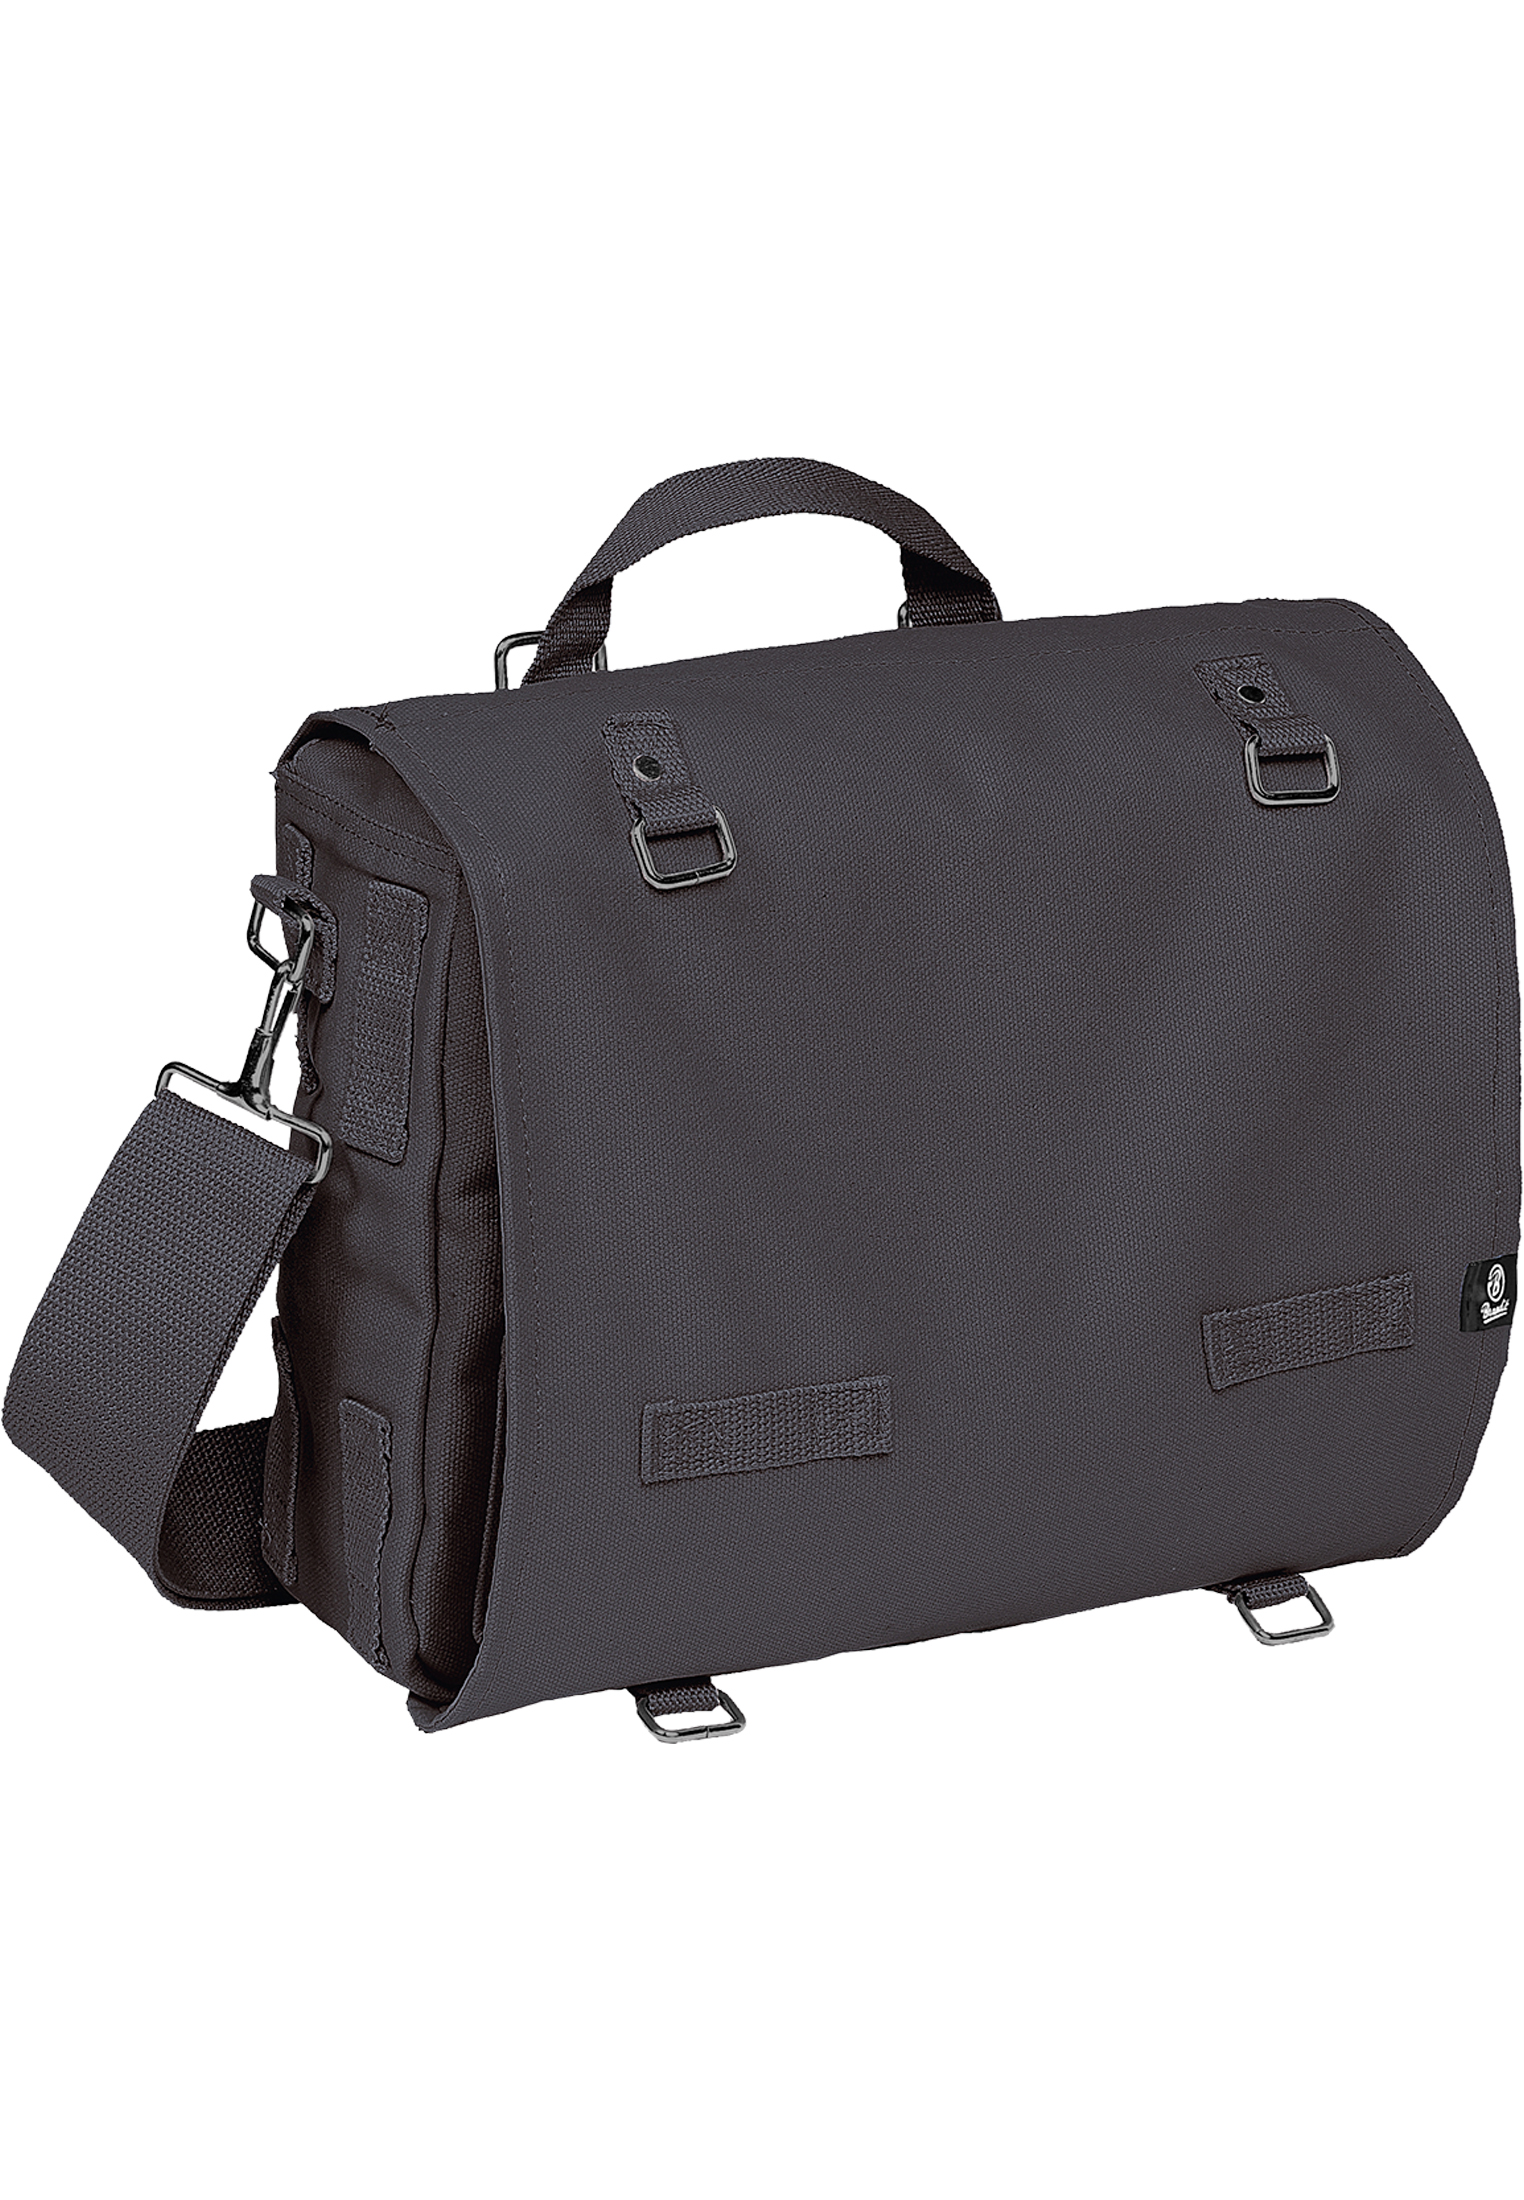 Taschen Big Military Bag in Farbe charcoal